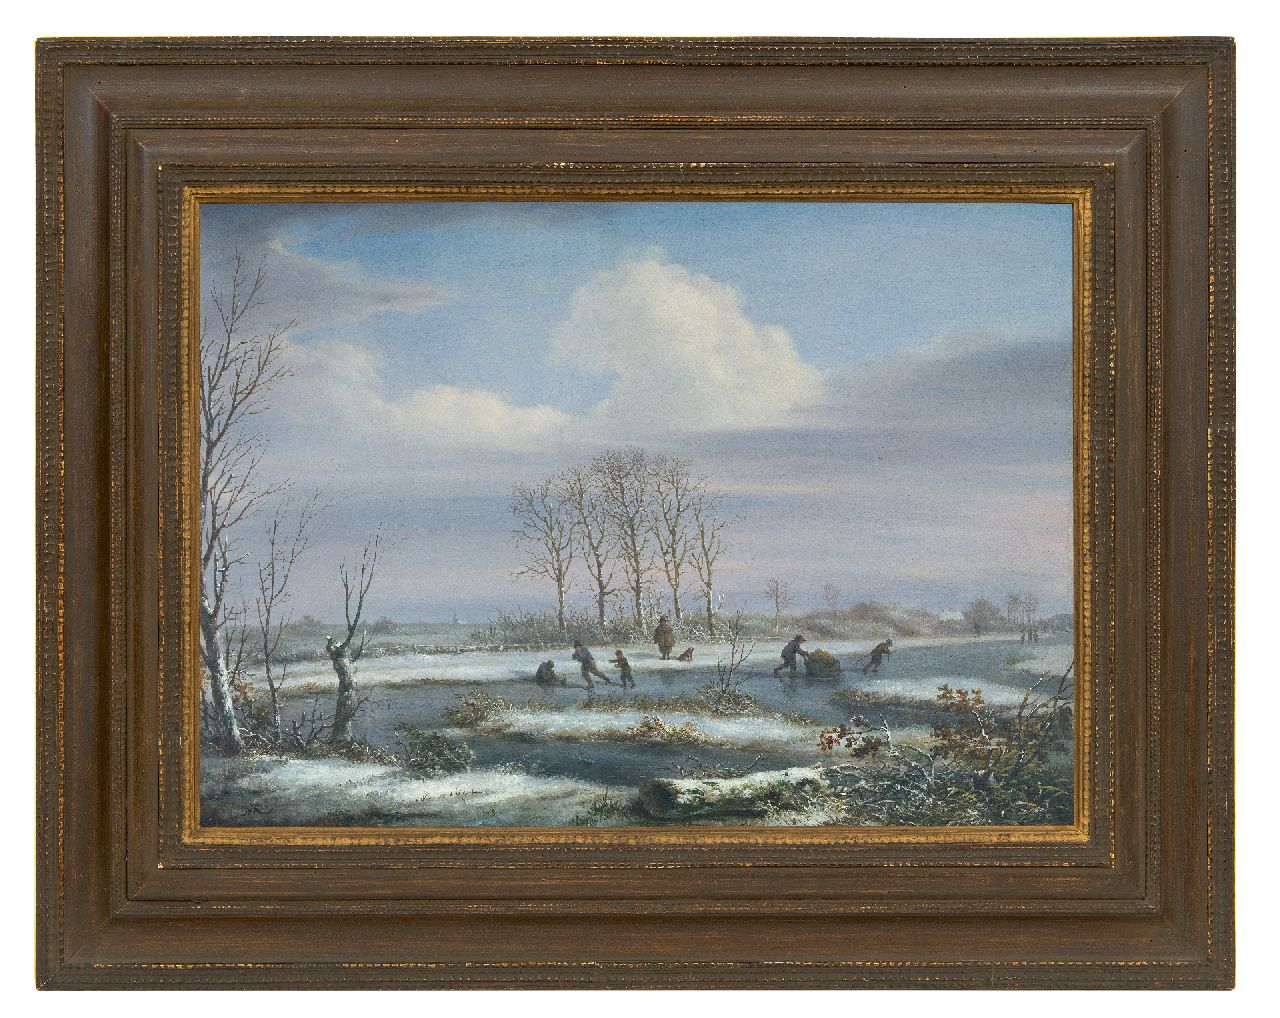 Kouwenhoven J. van | Jacob van Kouwenhoven | Paintings offered for sale | Winter landscape with skaters, oil on panel 31.0 x 43.6 cm, signed l.l. with initials